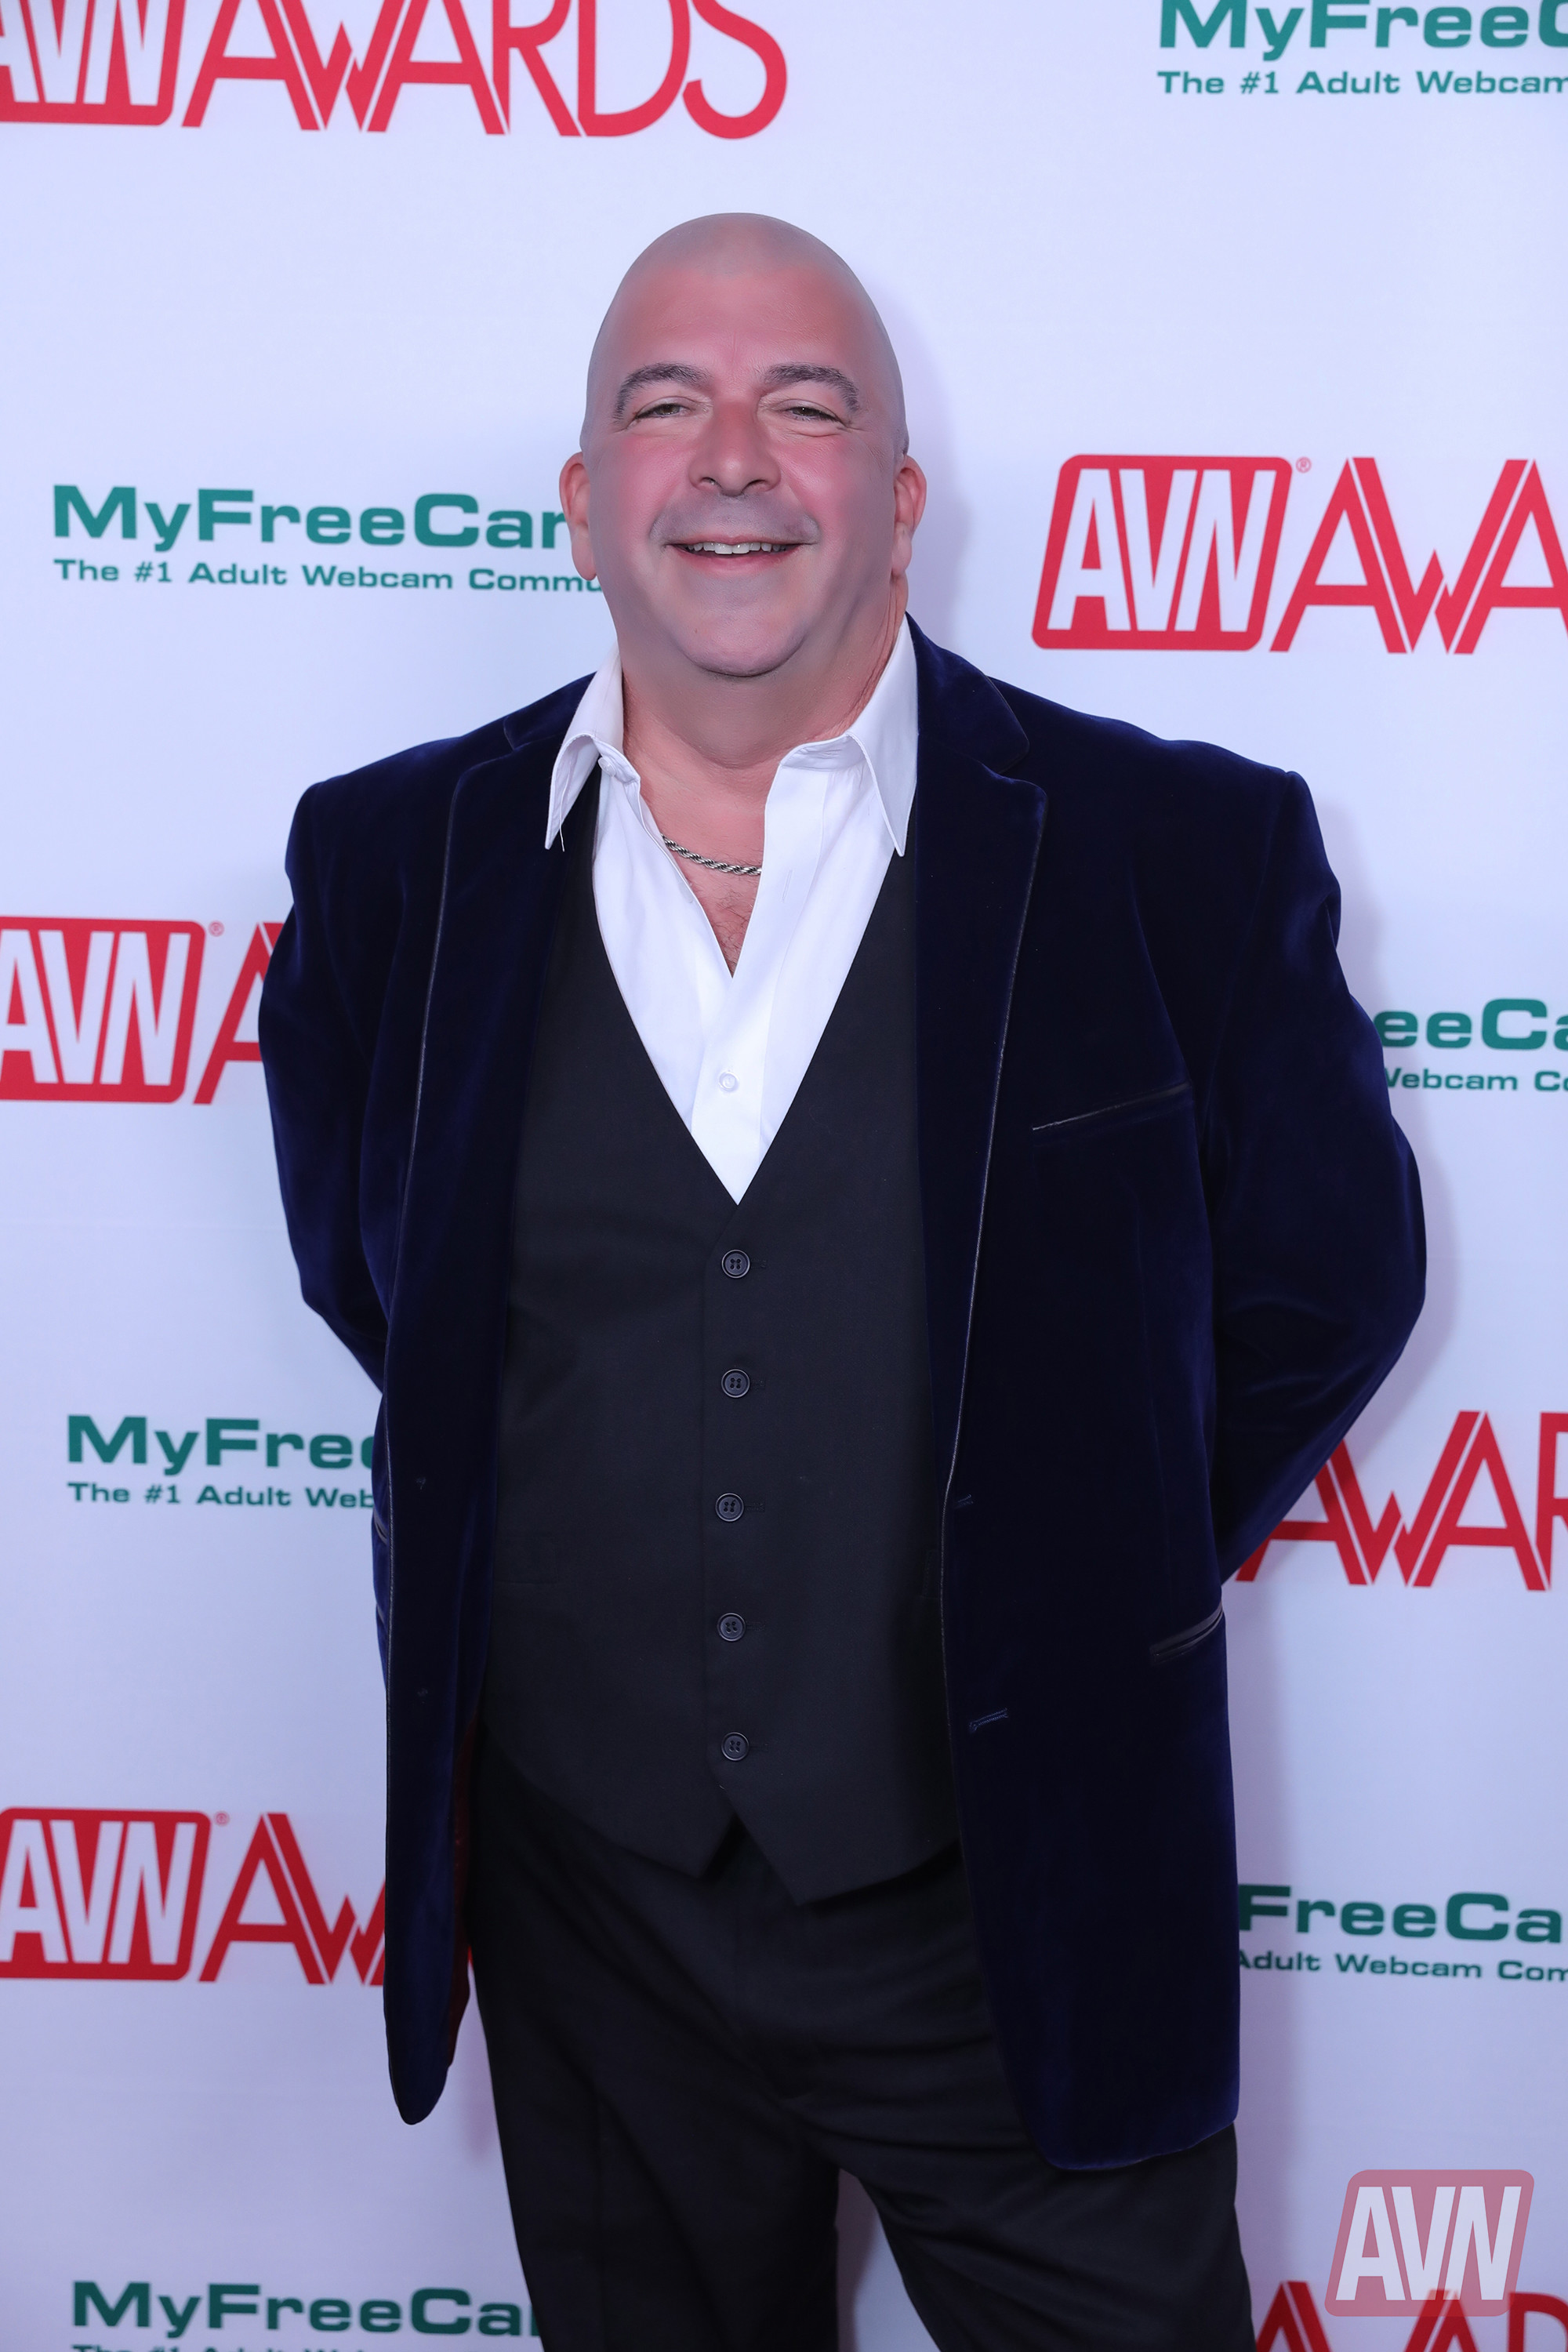 “Bartholet appearing at 2019 AVN Expo, hosting Event on 24th at Scores Vegas”